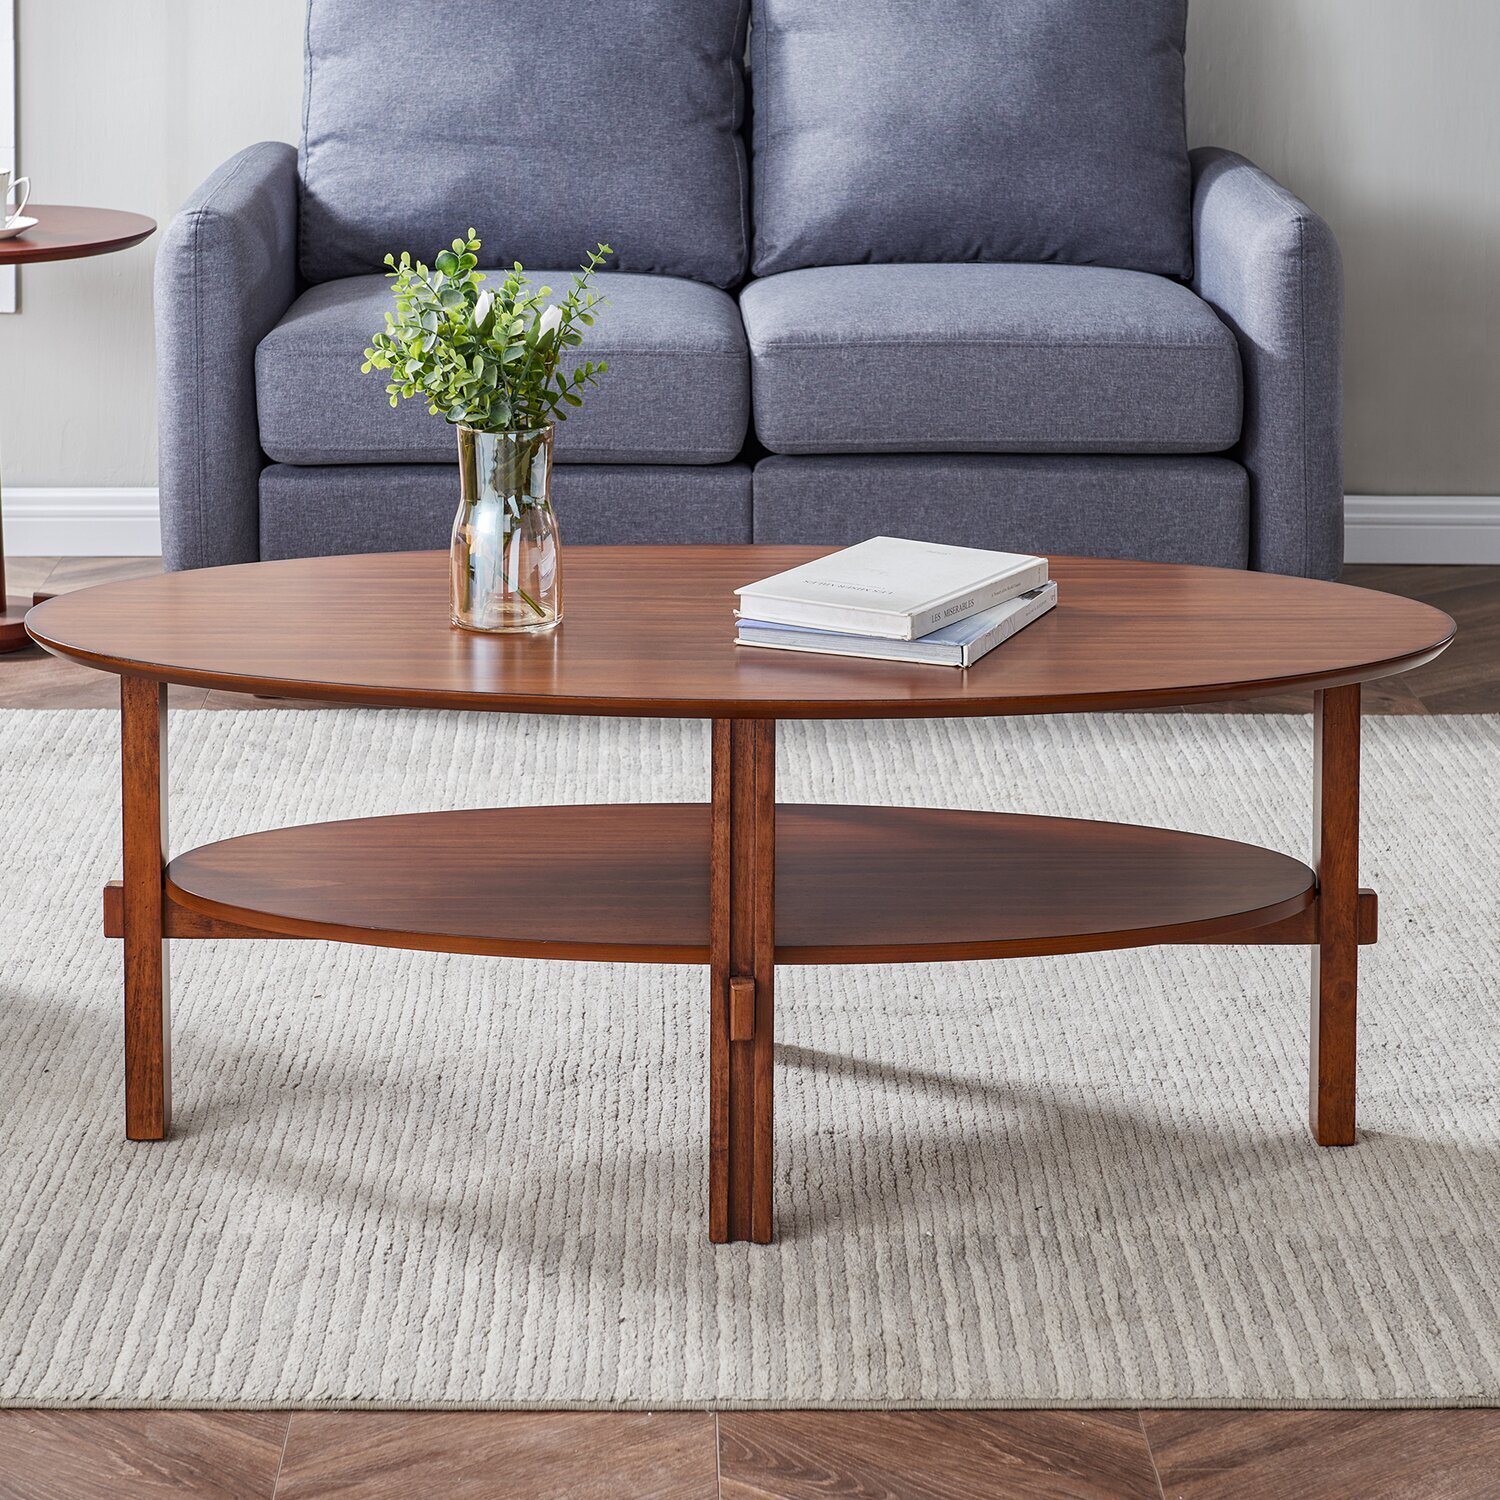 Rubberwood oval coffee table with storage